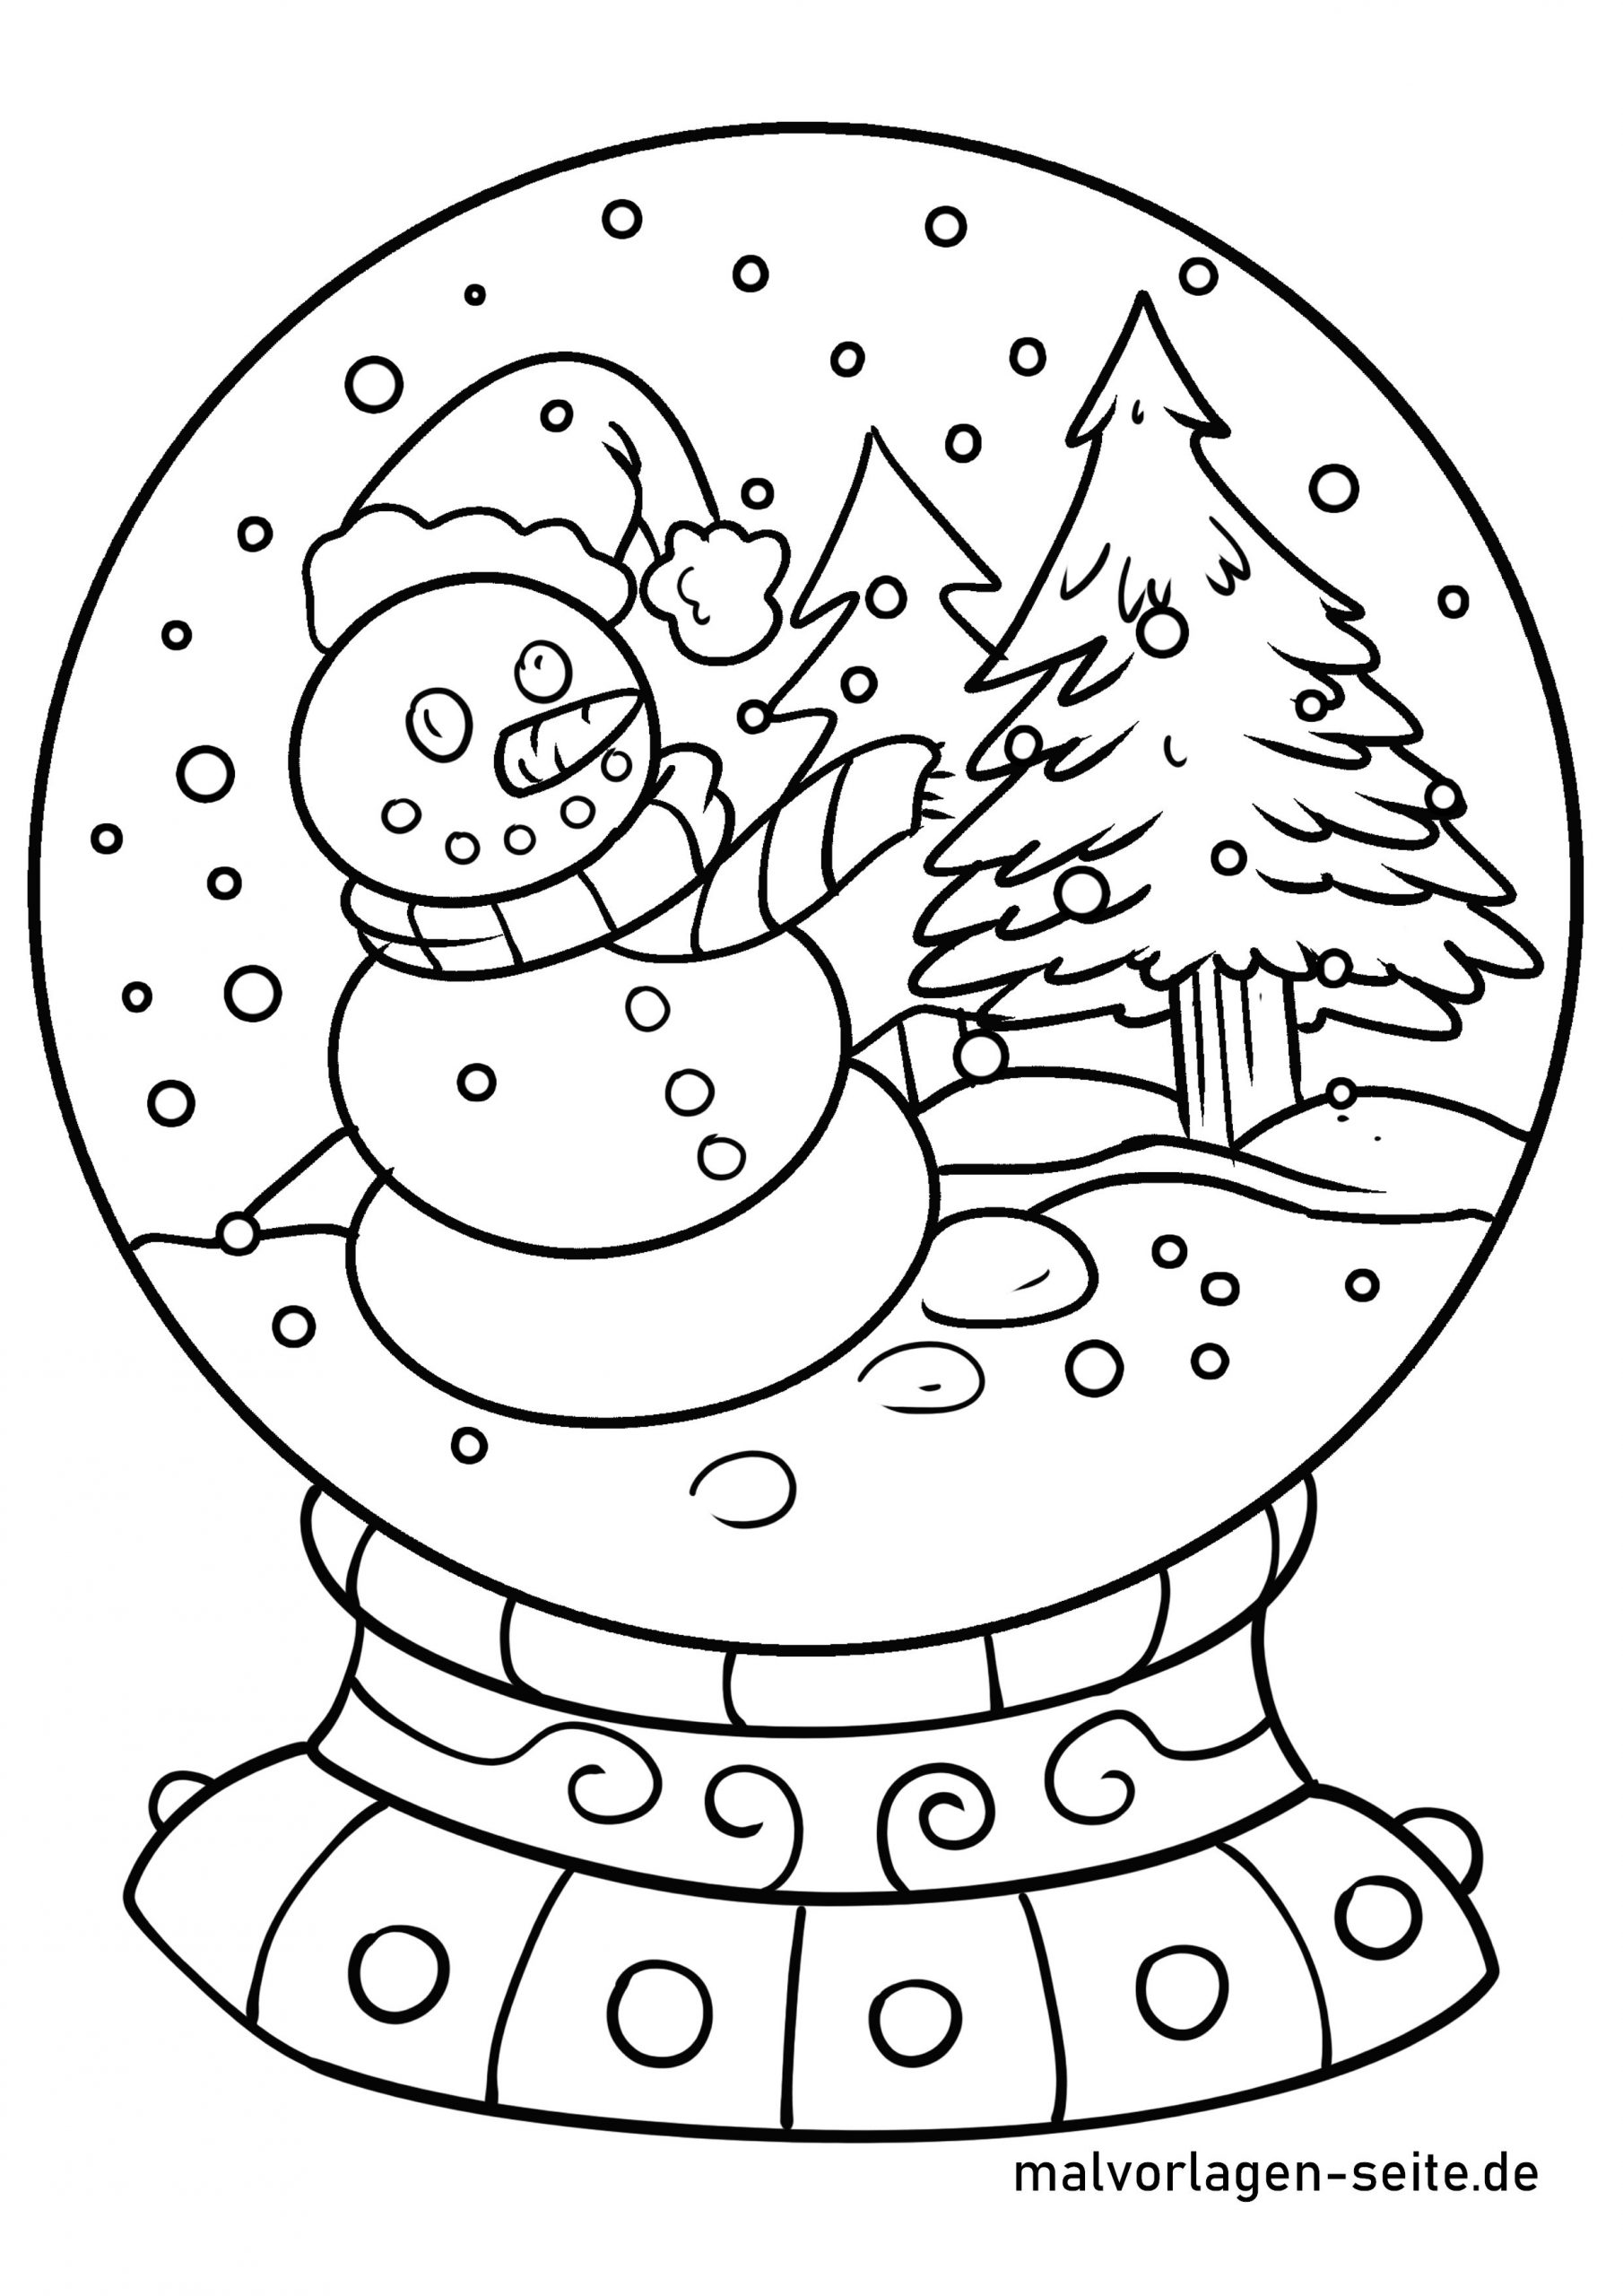 Printable Winter Coloring Pages vlr eng br